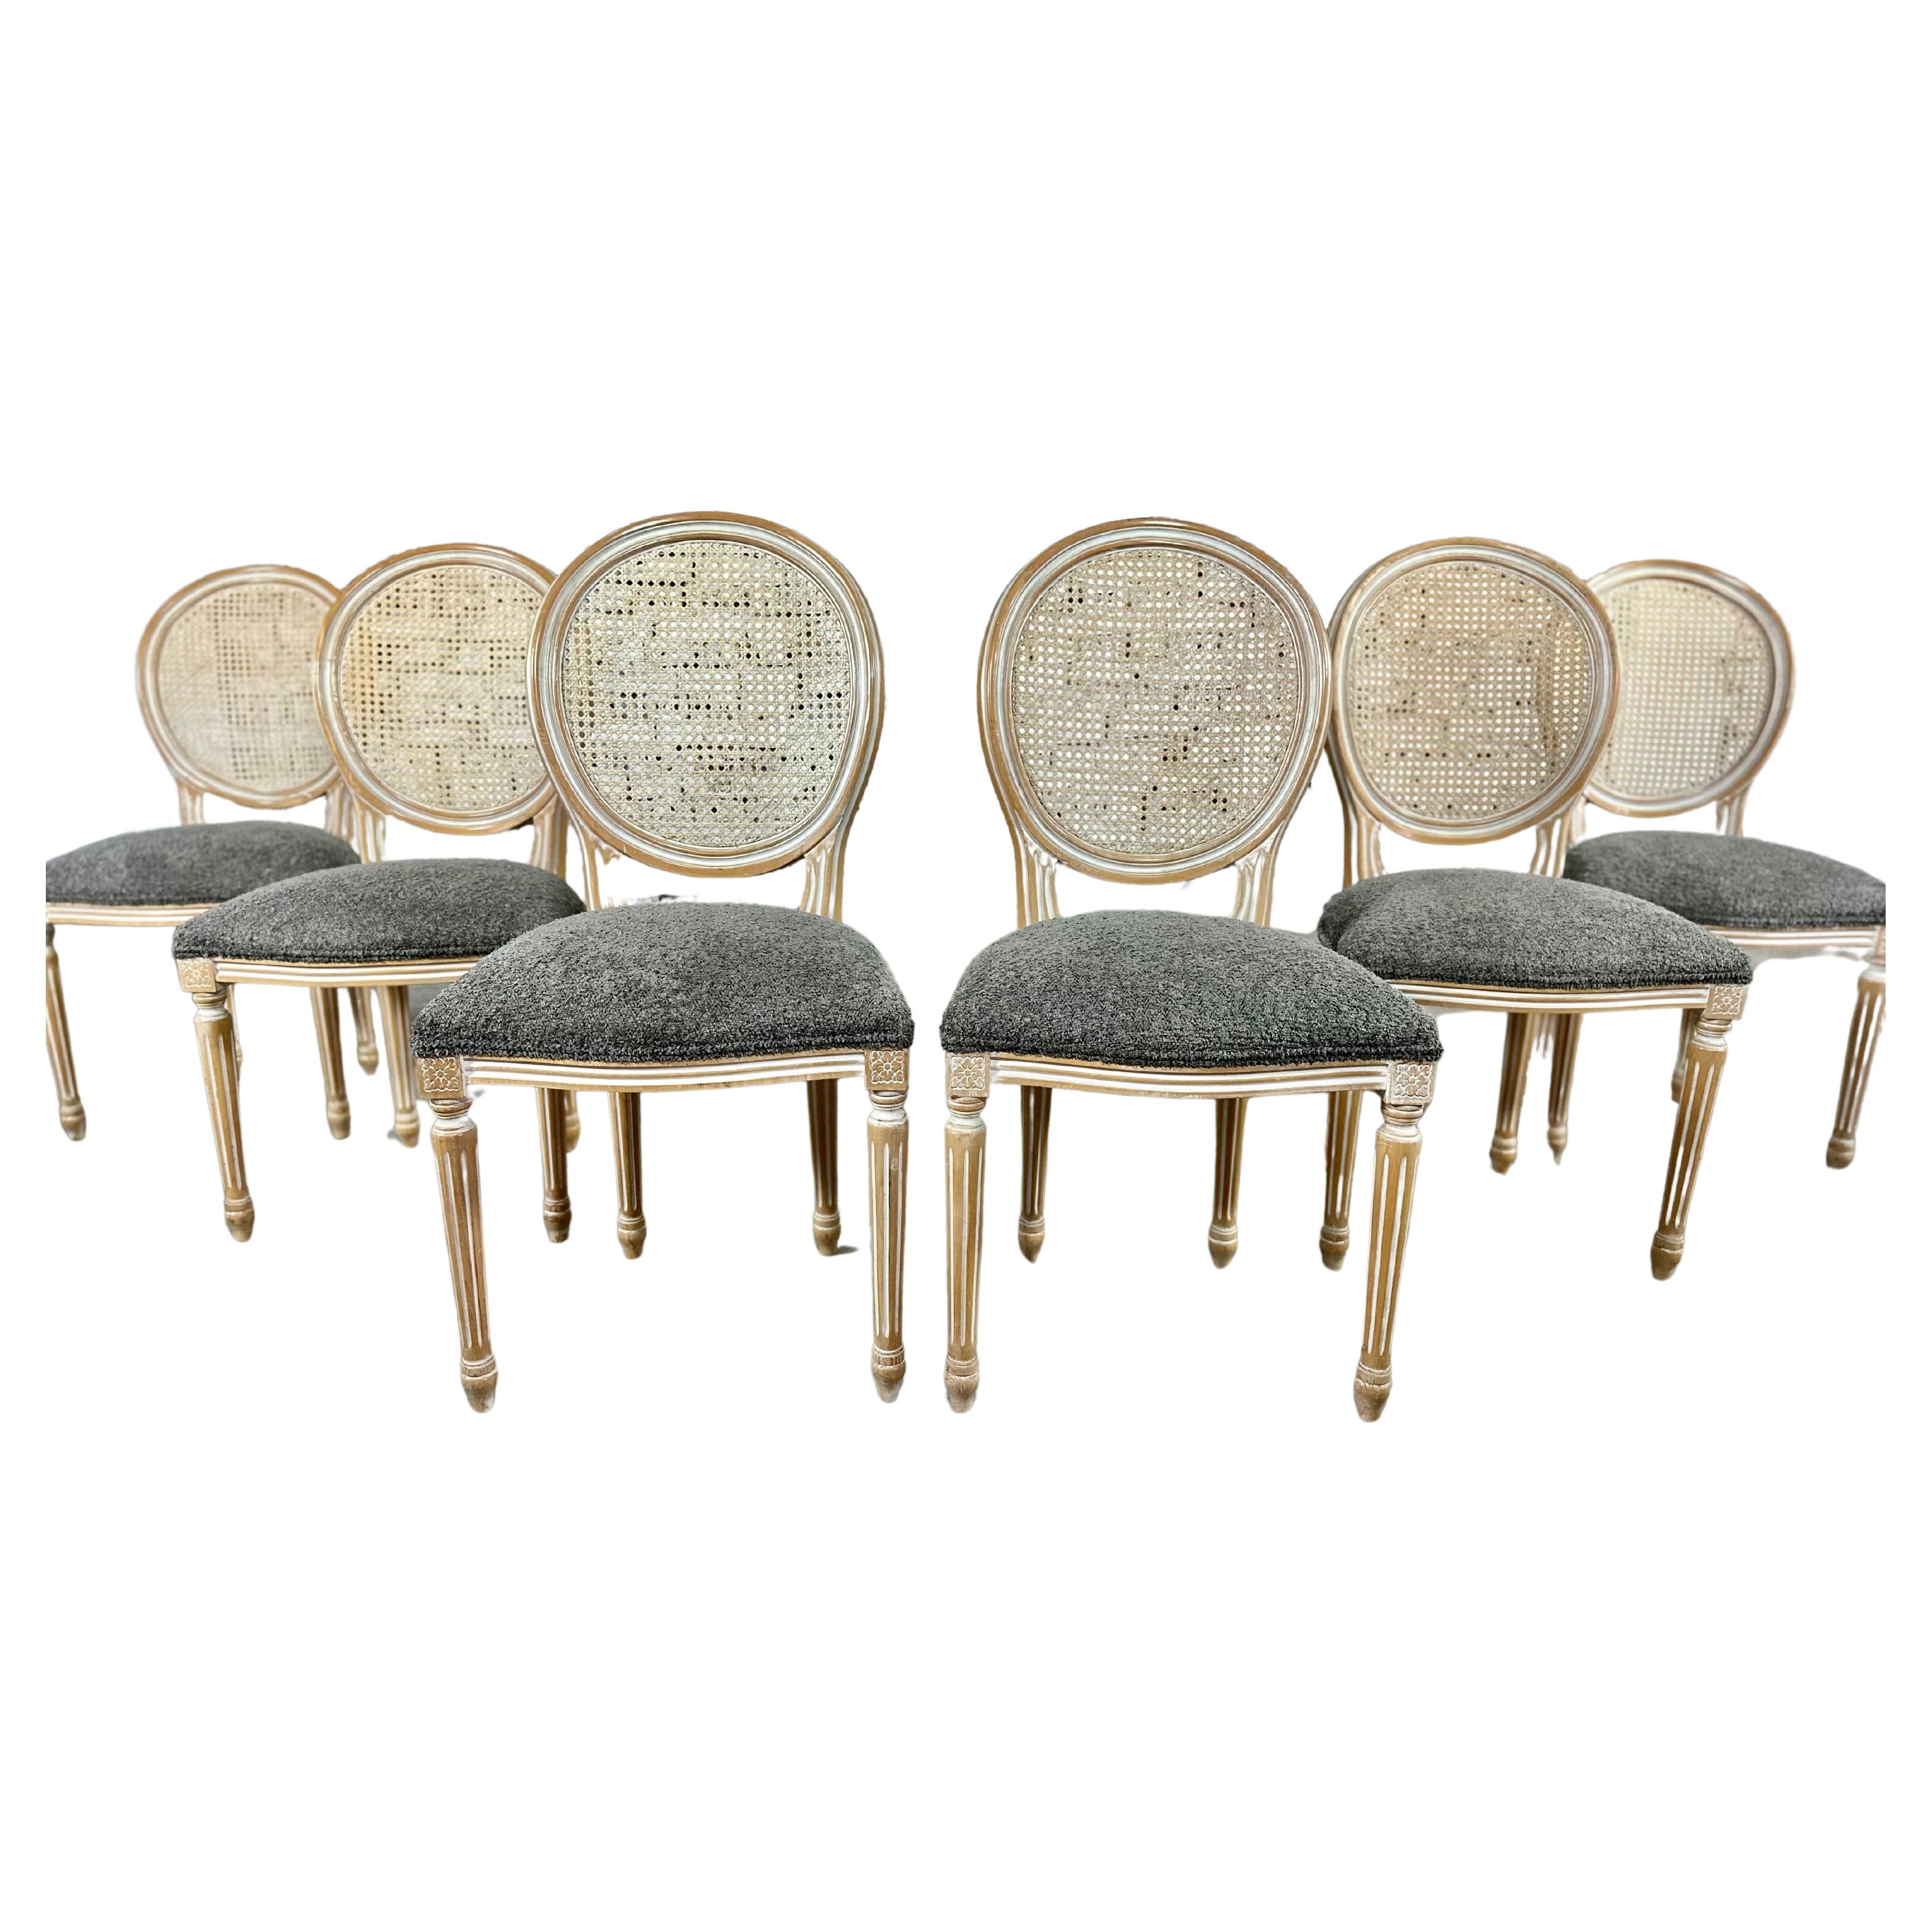 Louis XVI Medallion Cane Back Dining Chairs, Reupholstered - Set of 6